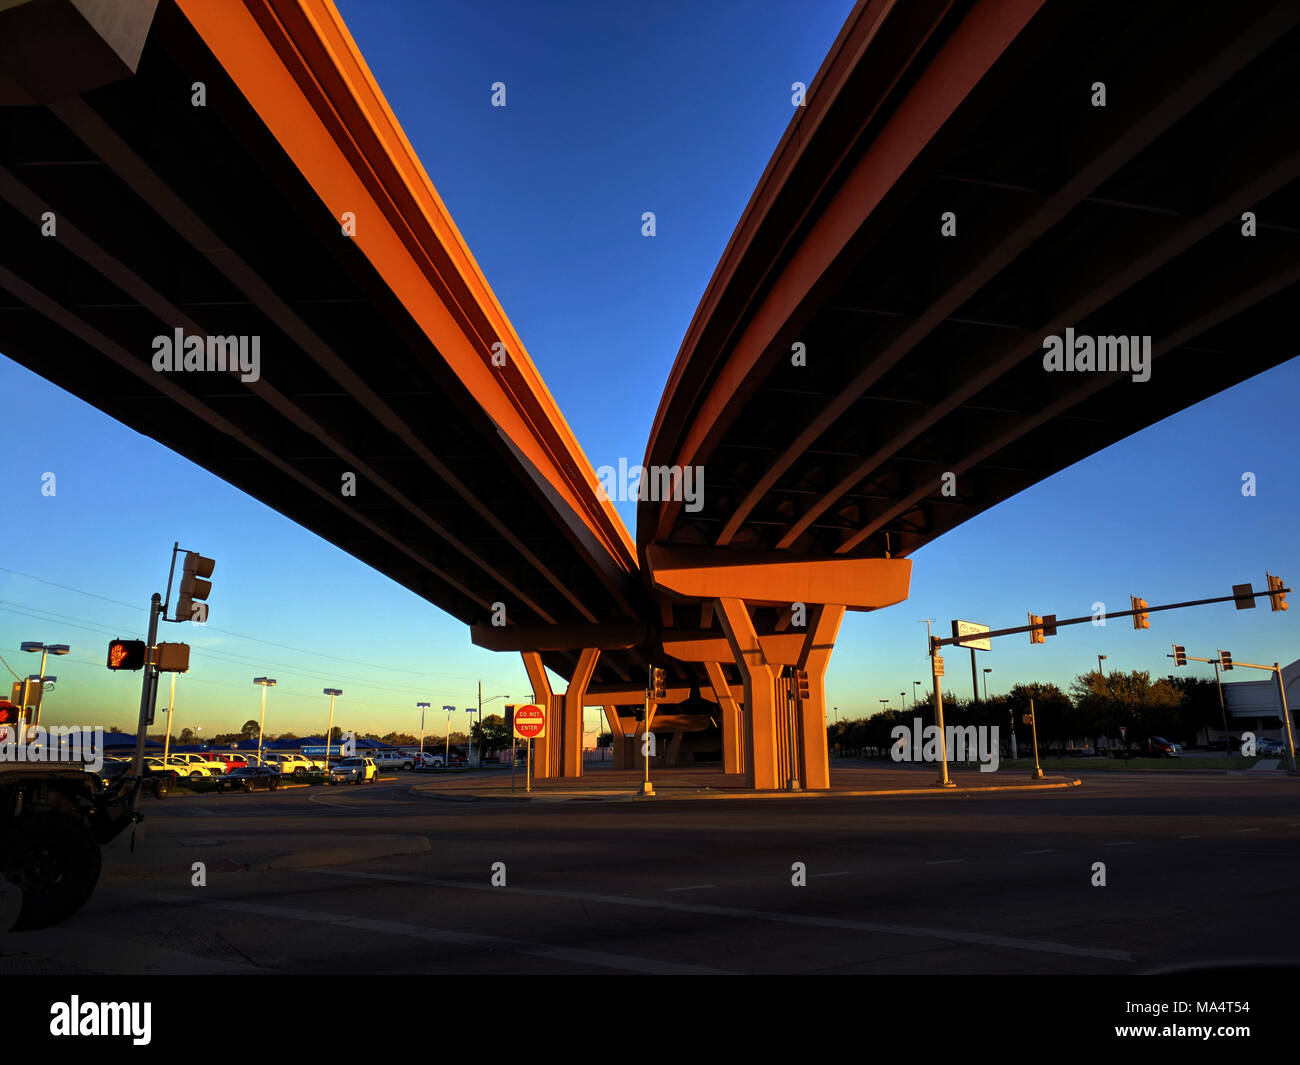 Looking up under the freeway in the early morning as two roads come together or split. Symbolize how in life one has to make some choices, go left or go right, but sometimes two views come together. Depends on which way you are going. Stock Photo